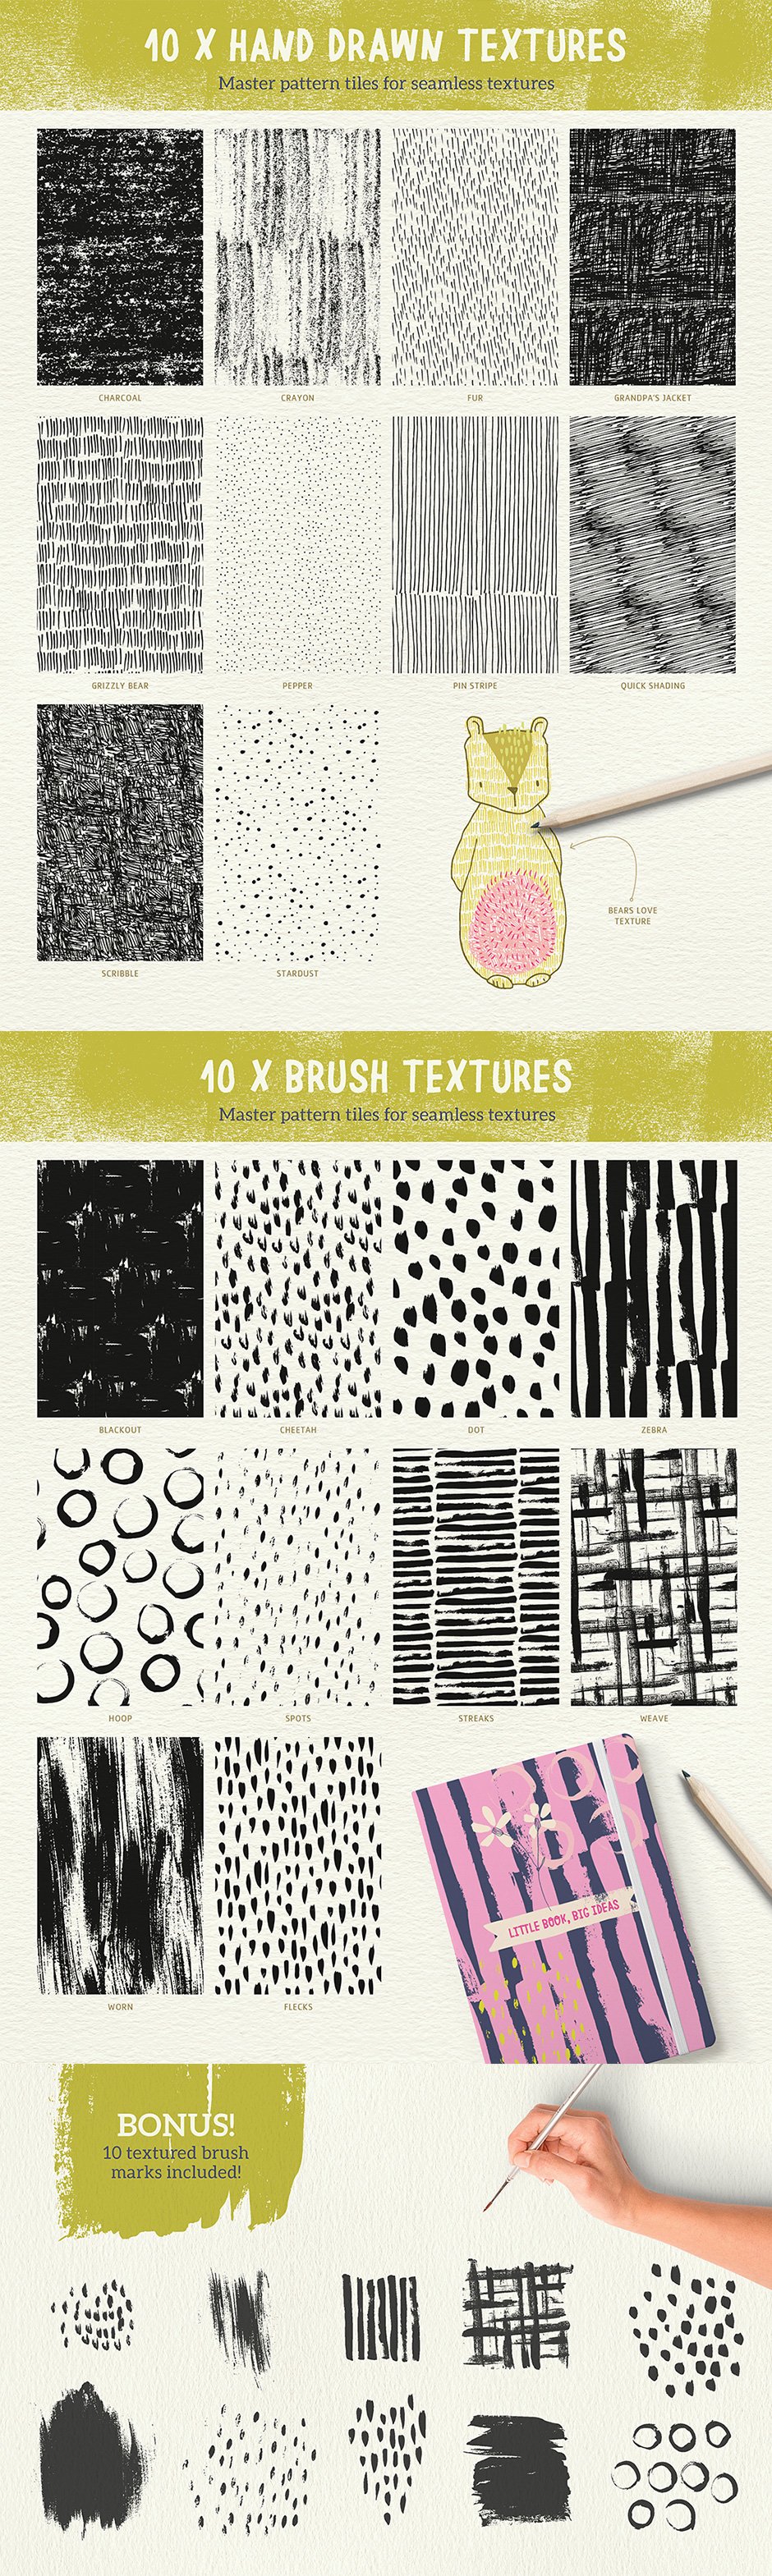 Tasty Textures Pack